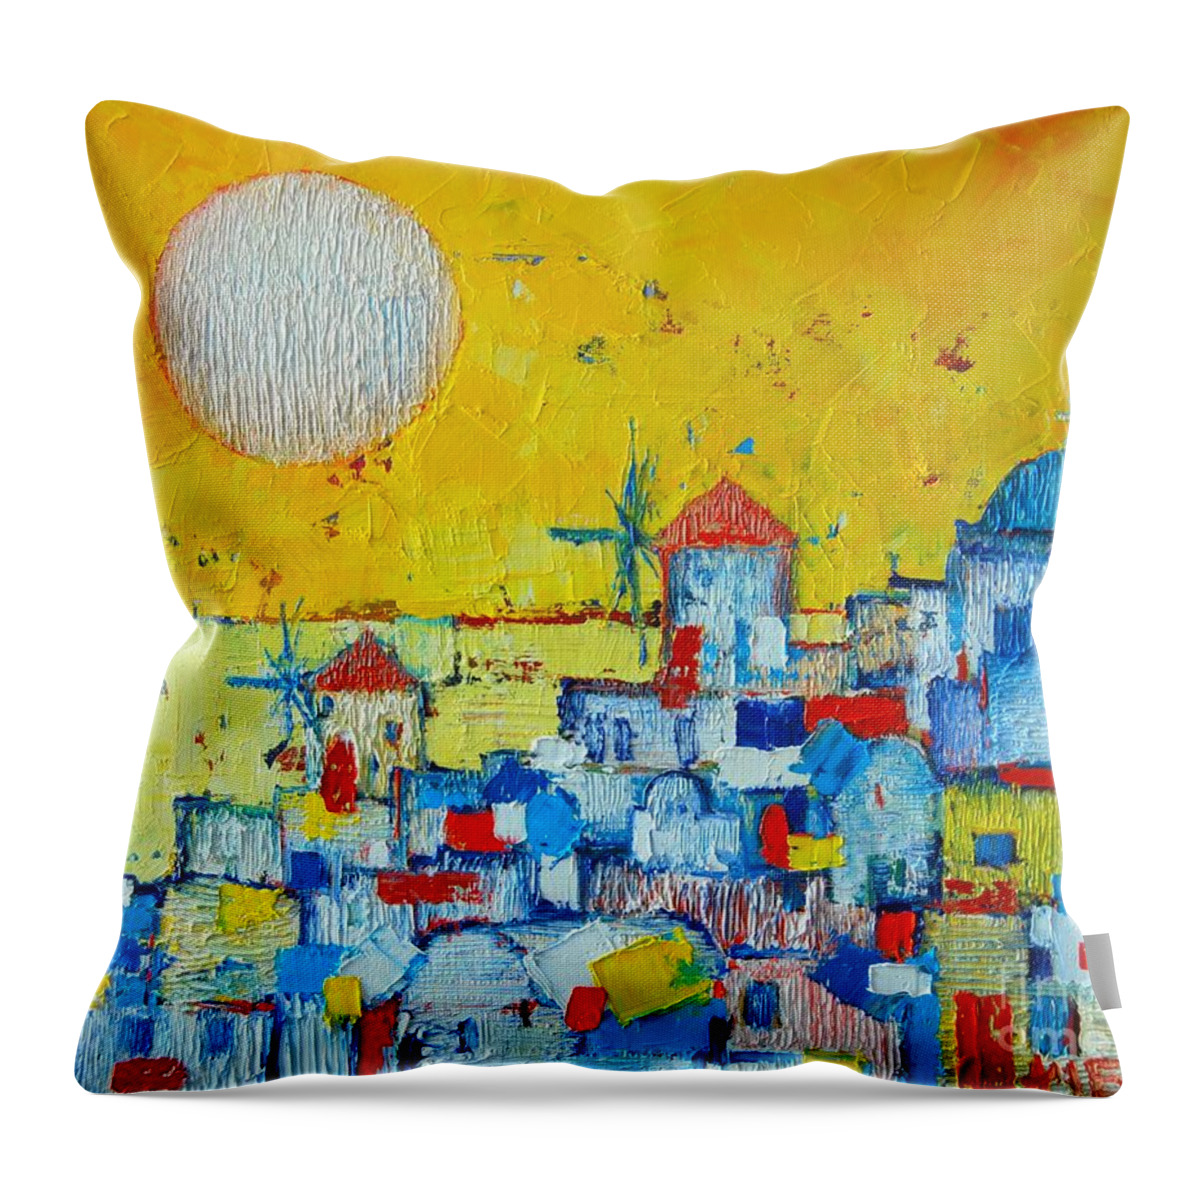 Santorini Throw Pillow featuring the painting Abstract Santorini - Oia Before Sunset by Ana Maria Edulescu